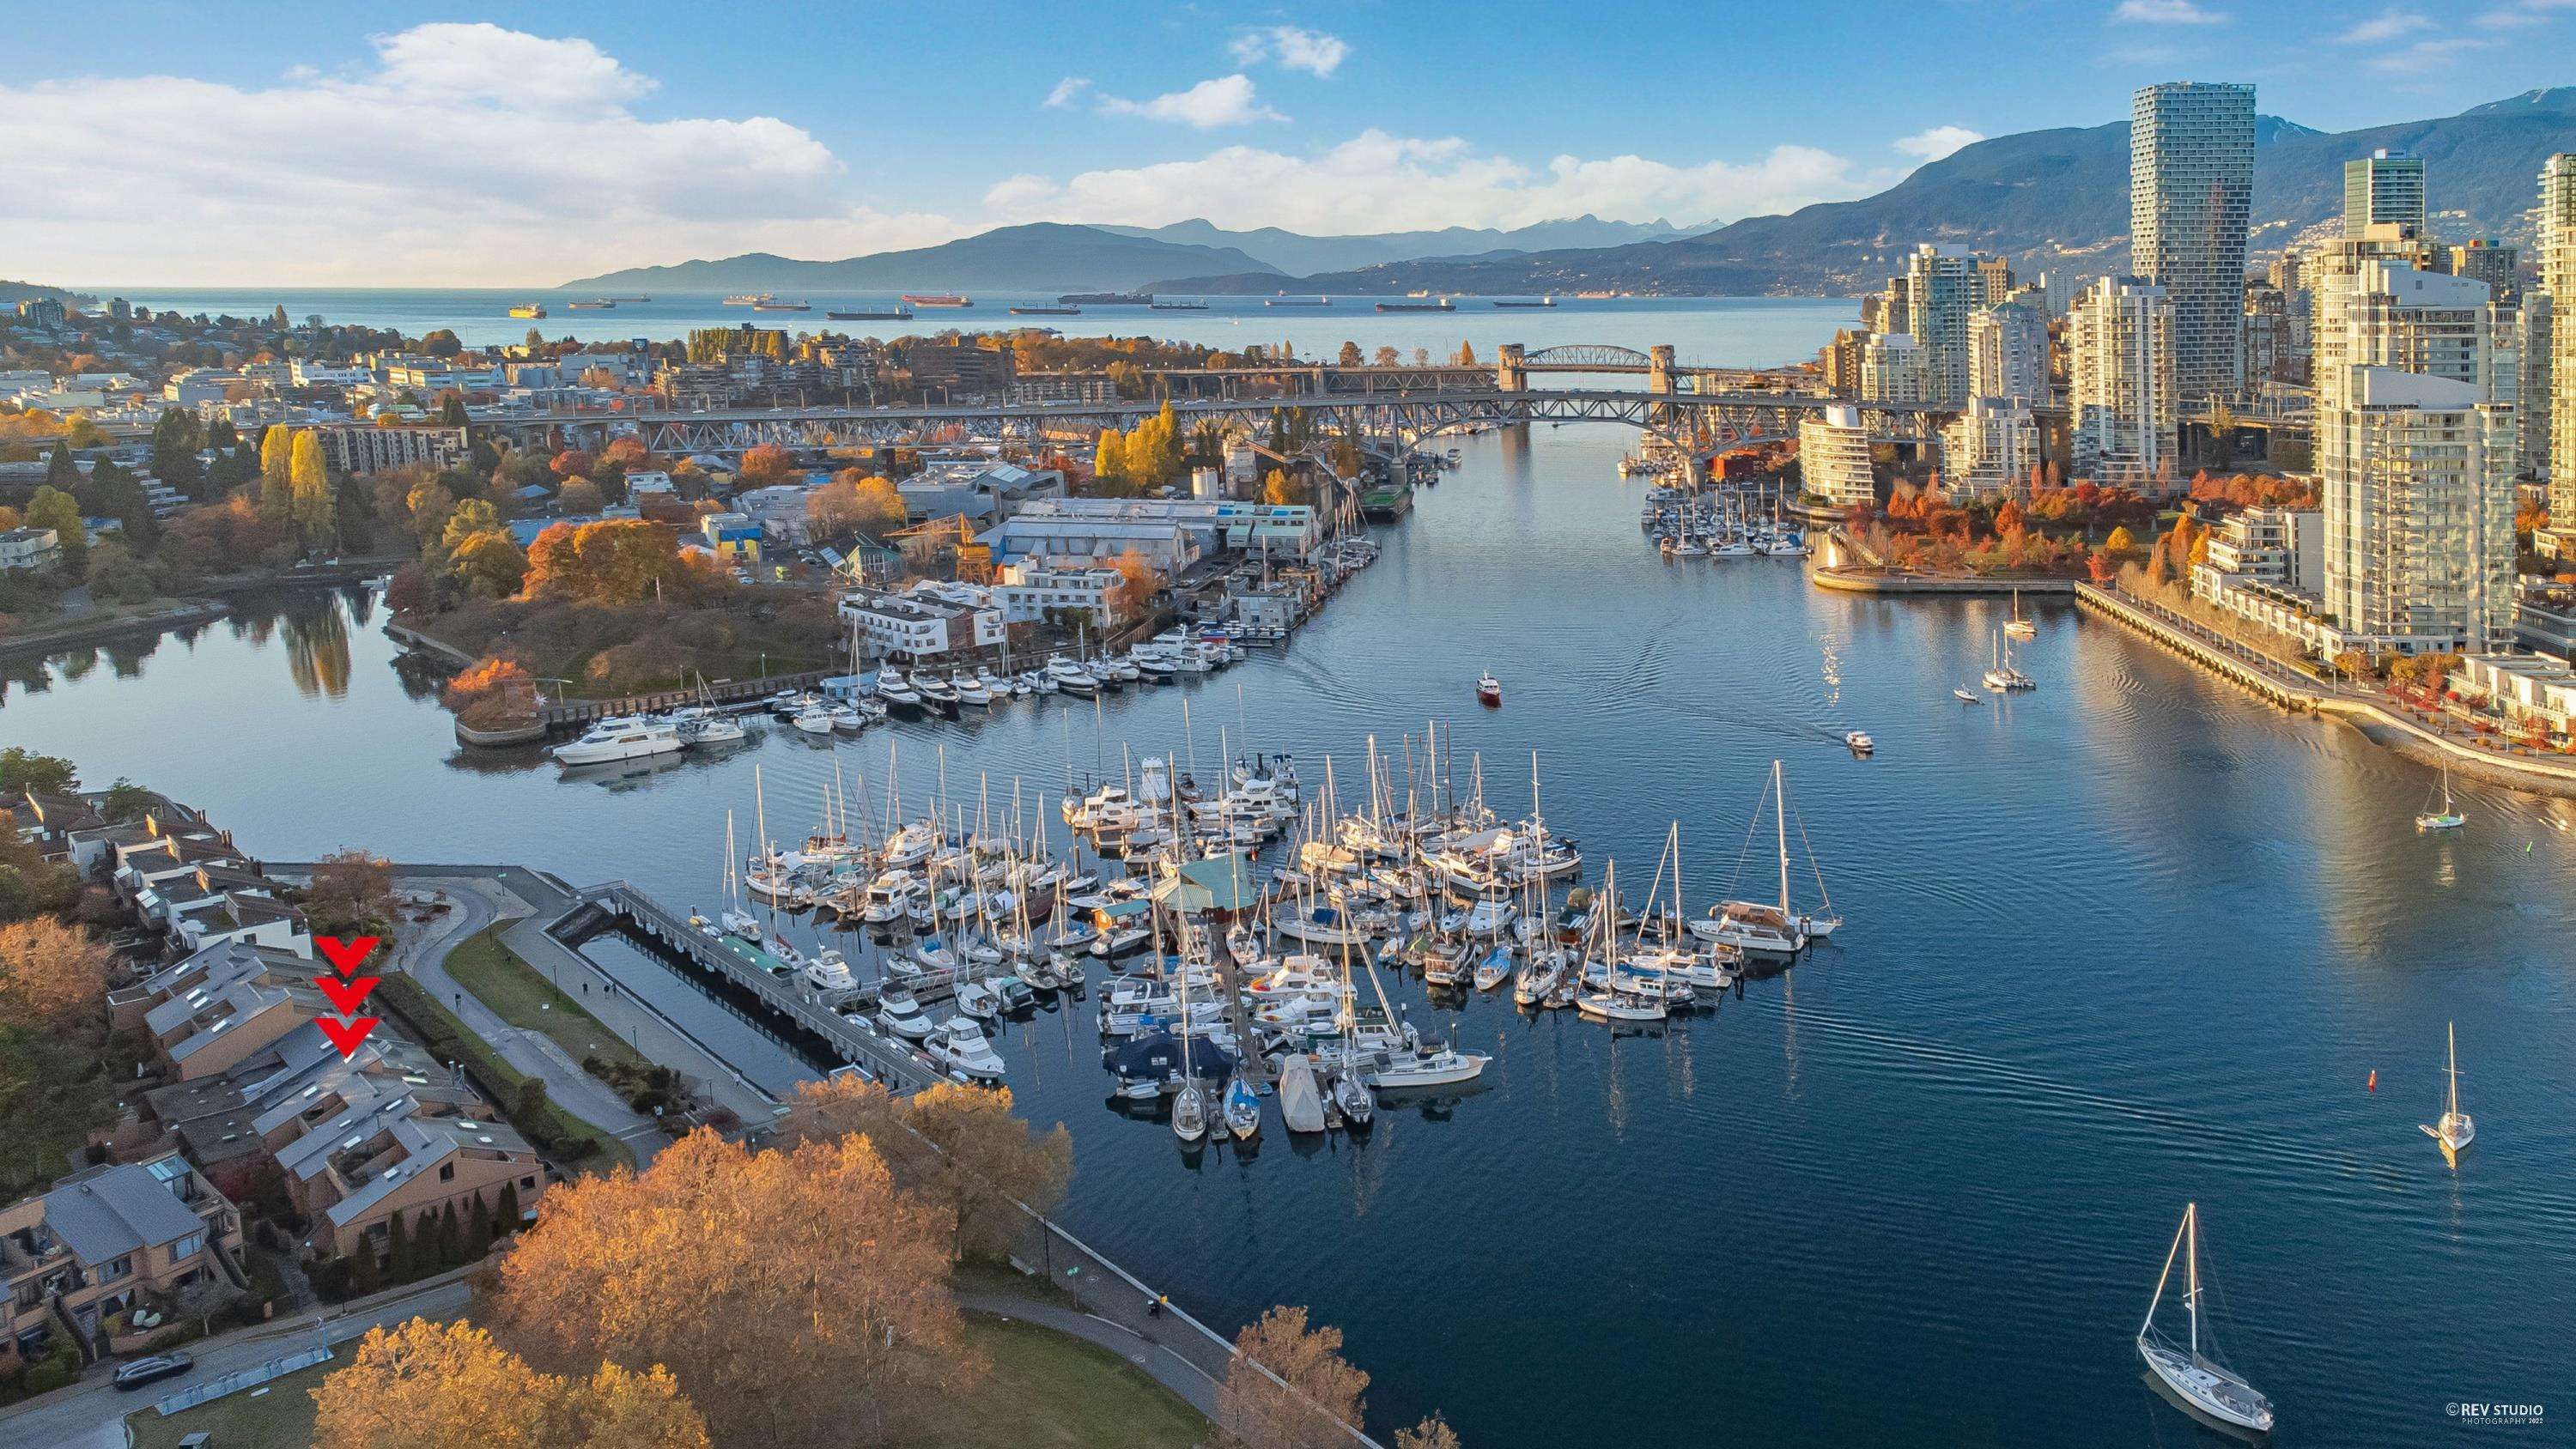 Open House. Open House on Sunday, February 12, 2023 2:00PM - 4:00PM
WATERFRONT TOWNHOUSE w/ stunning water, marina, cityscape and mtn views. 180 degree views W out to English Bay sunsets and E to the Cambie St. Bridge sunrises. Renovation by Colbrone Arch